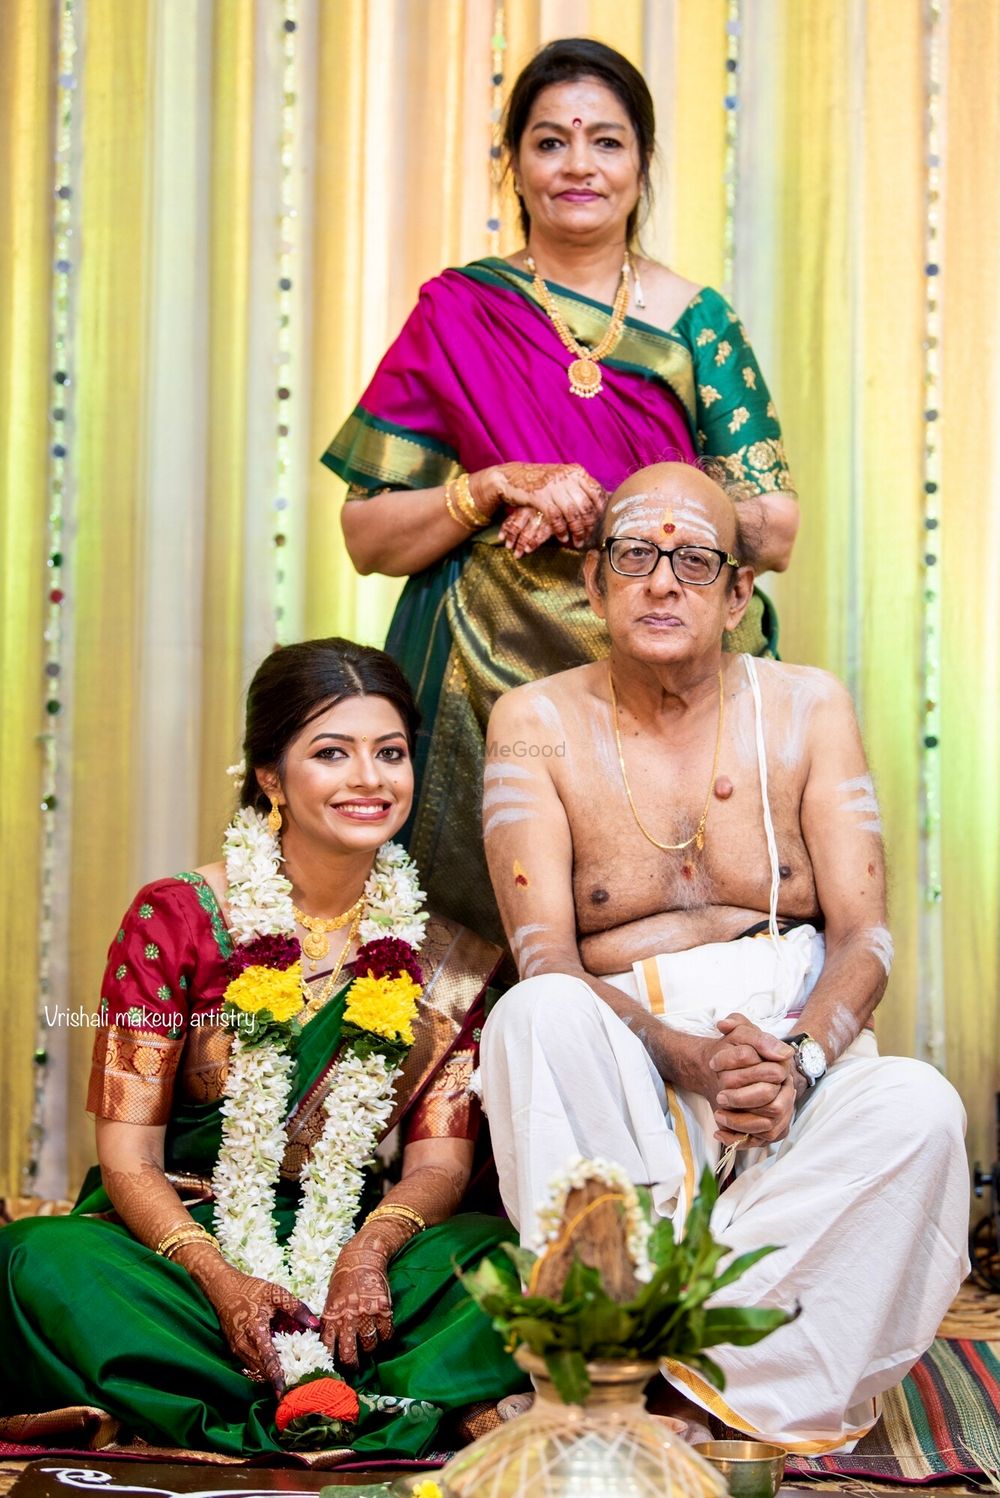 Photo From South Indian bride - By Vrishali Makeup Artistry